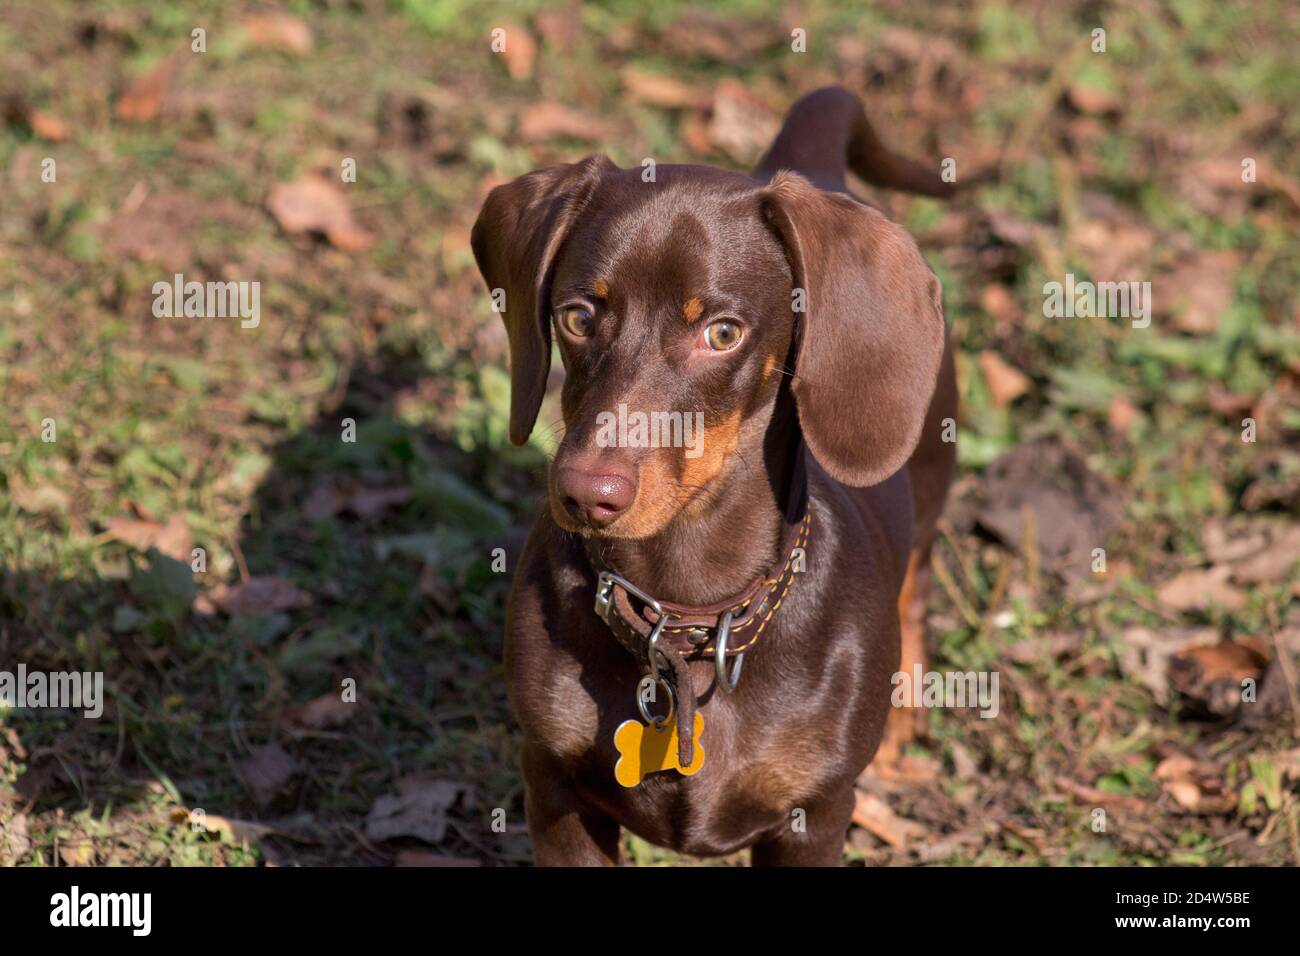 Cute dachshund puppy is standing in the autumn park. Wiener dog or sausage dog. Pet animals. Purebred dog. Stock Photo